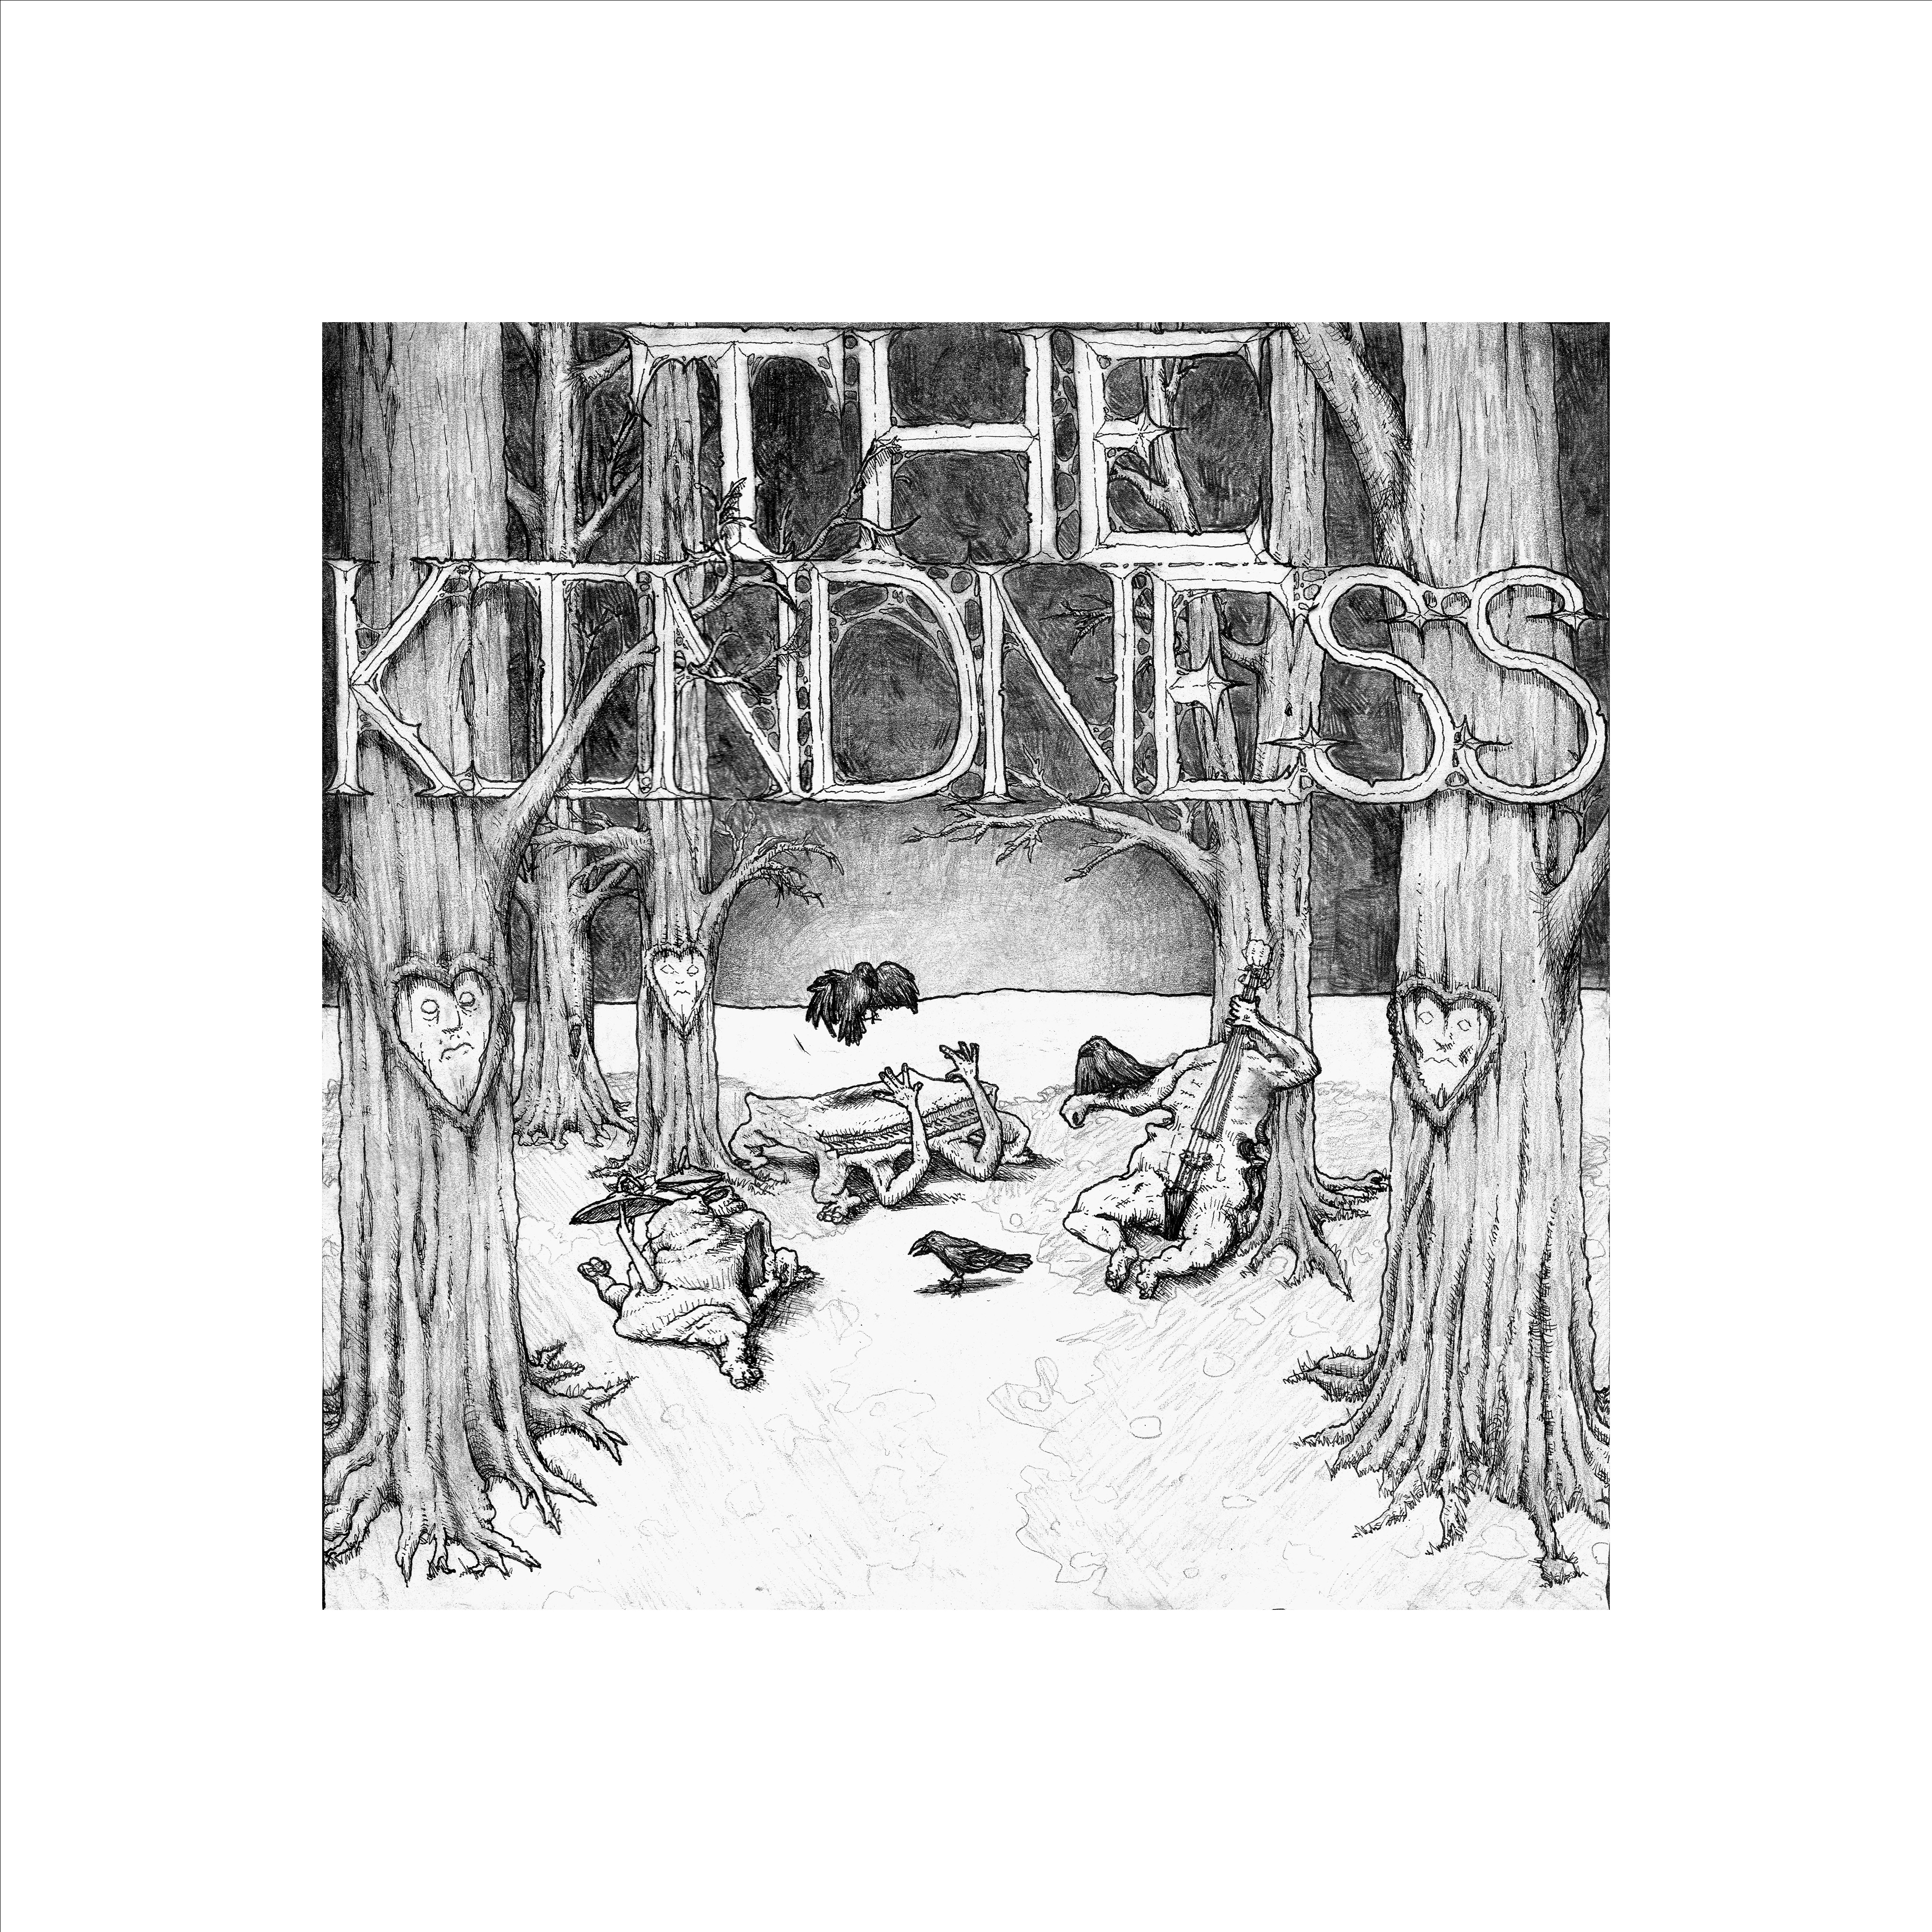 Album art for the debut album from The Kindness